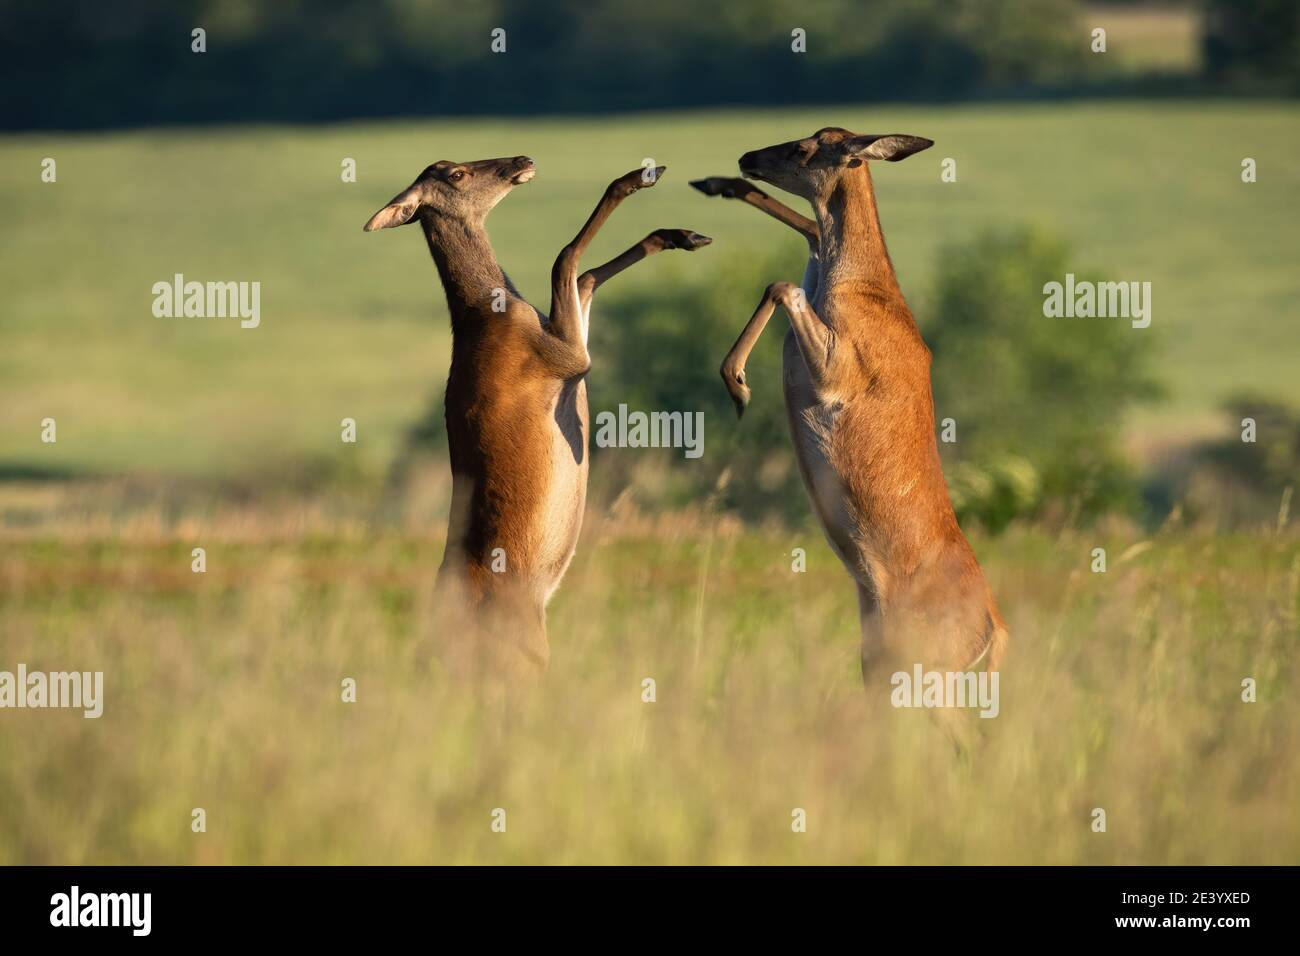 Two red deer hinds fighting on meadow in summertime nature Stock Photo